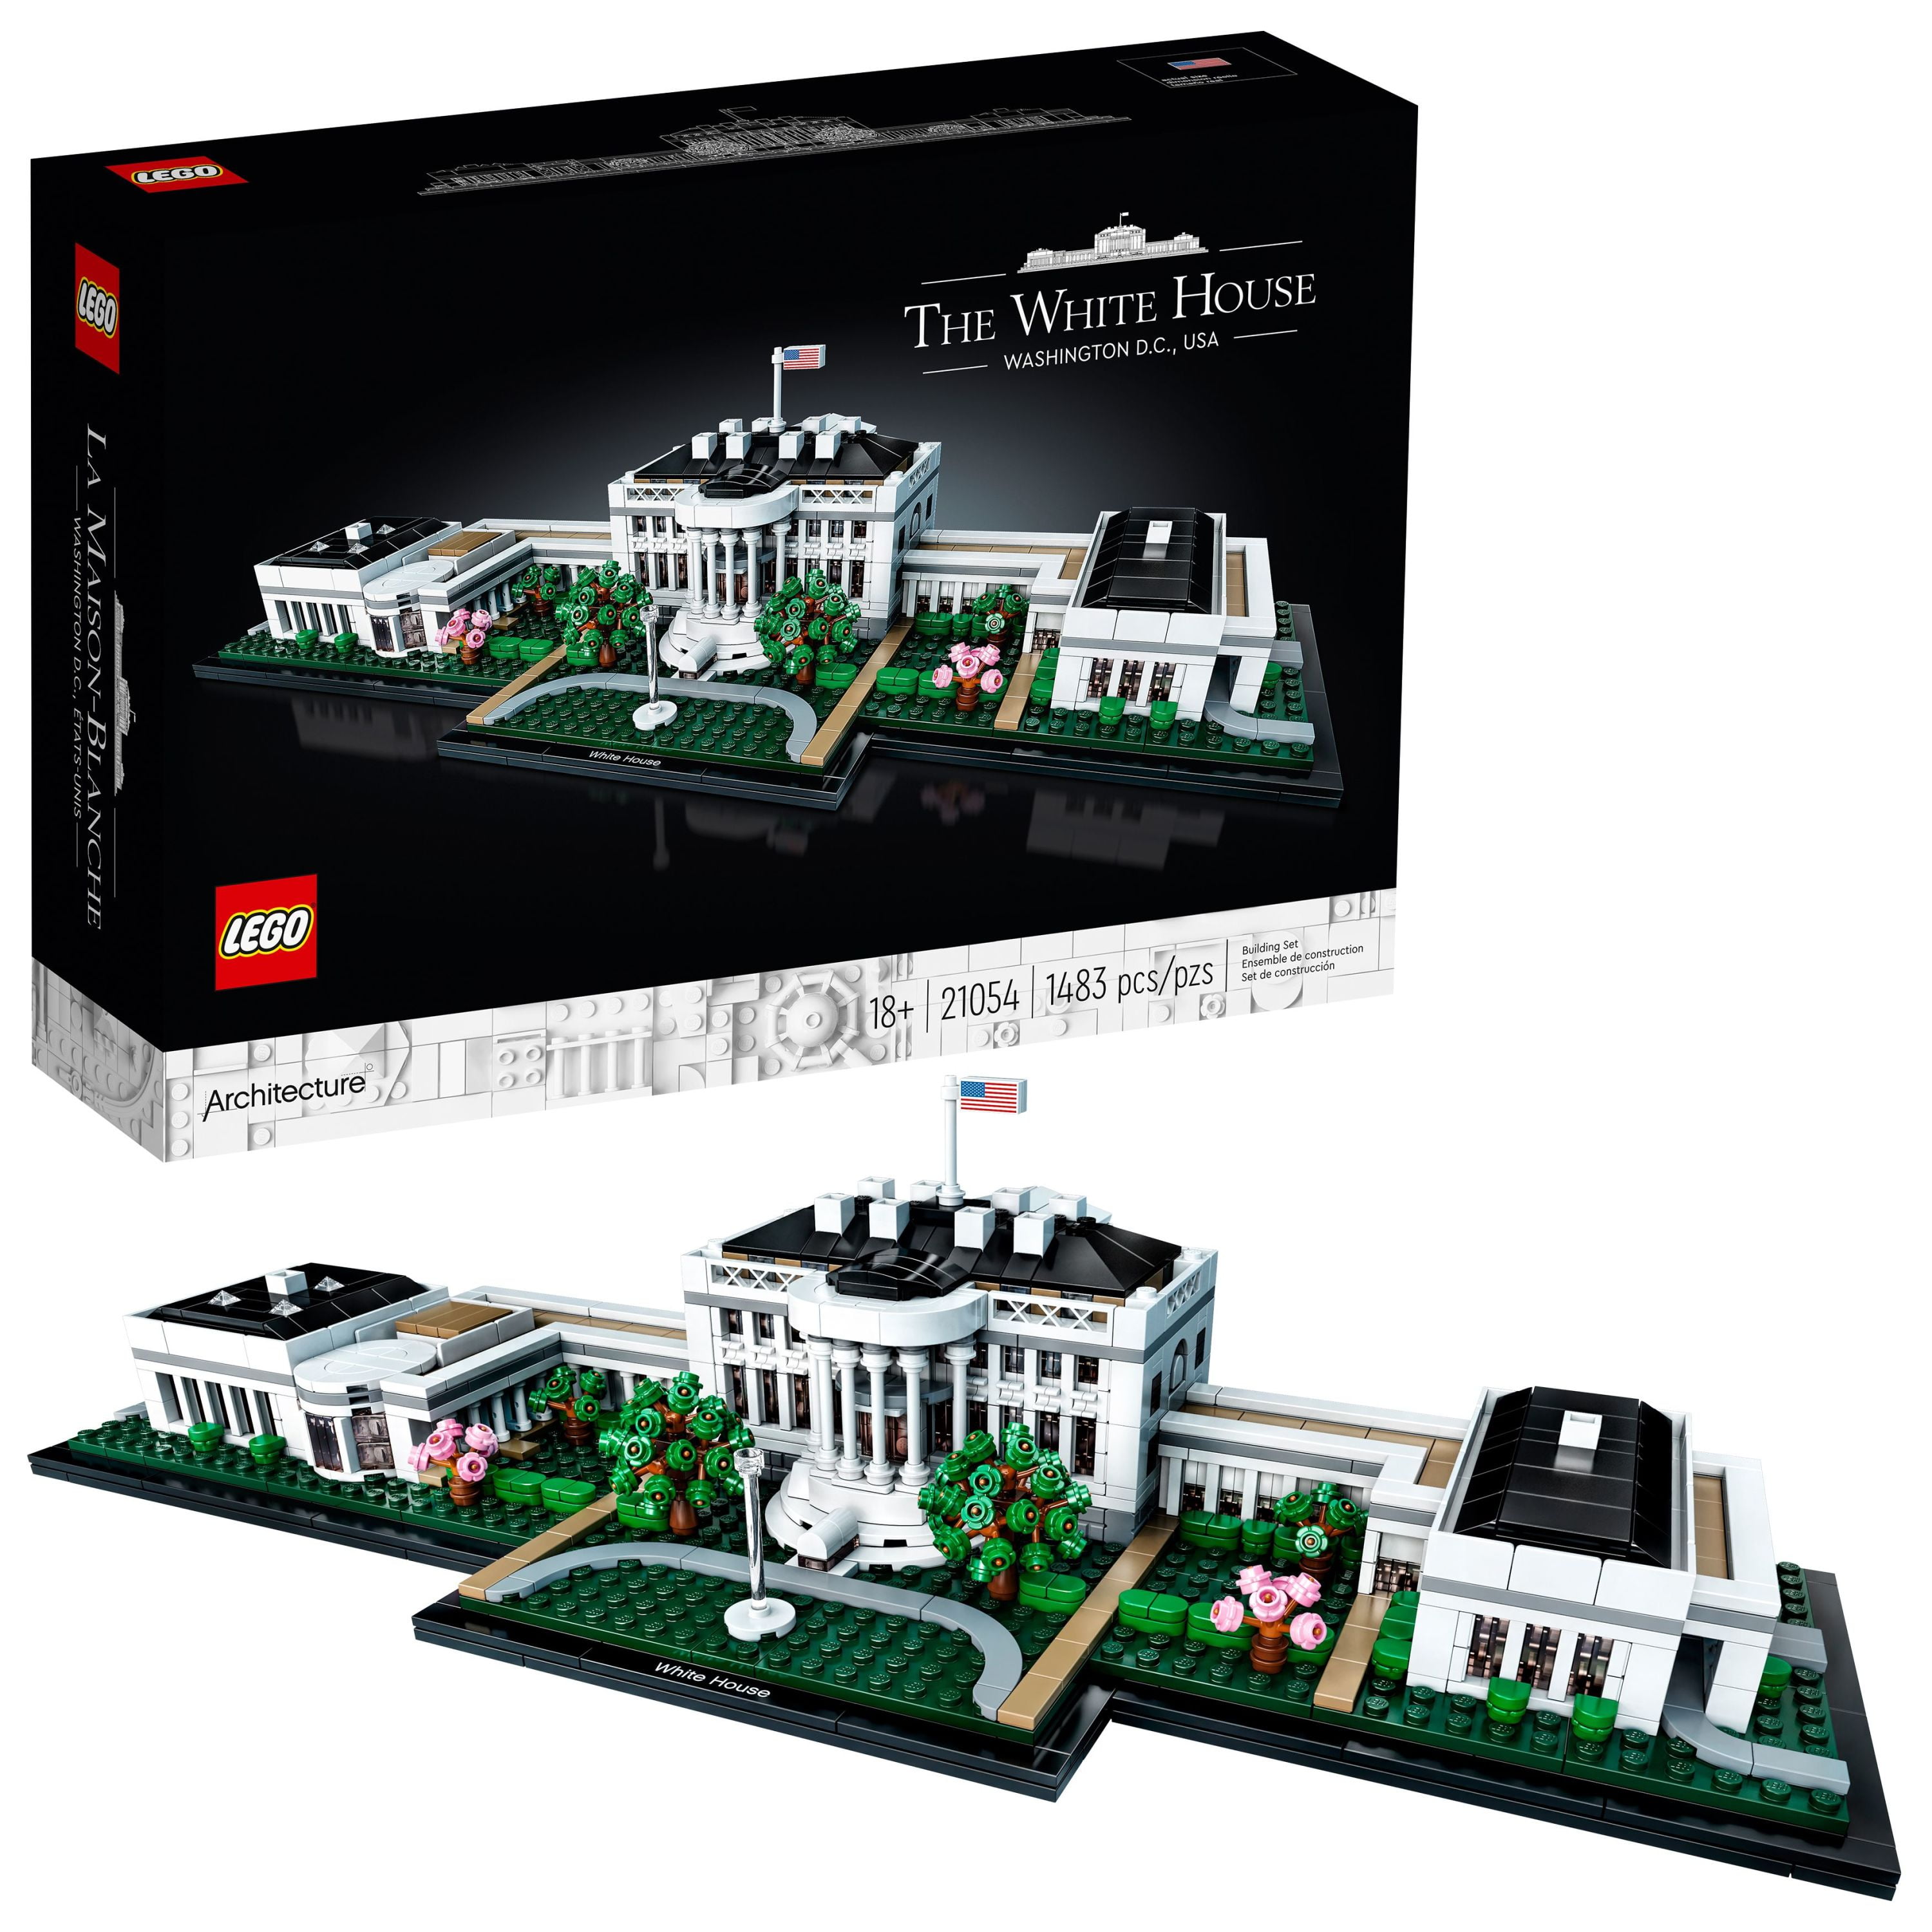 tendens FALSK bent LEGO Architecture The White House 21054 Display Model Building Kit,  Landmark Collection for Adults, Collectible Home Décor Gift Idea -  Walmart.com